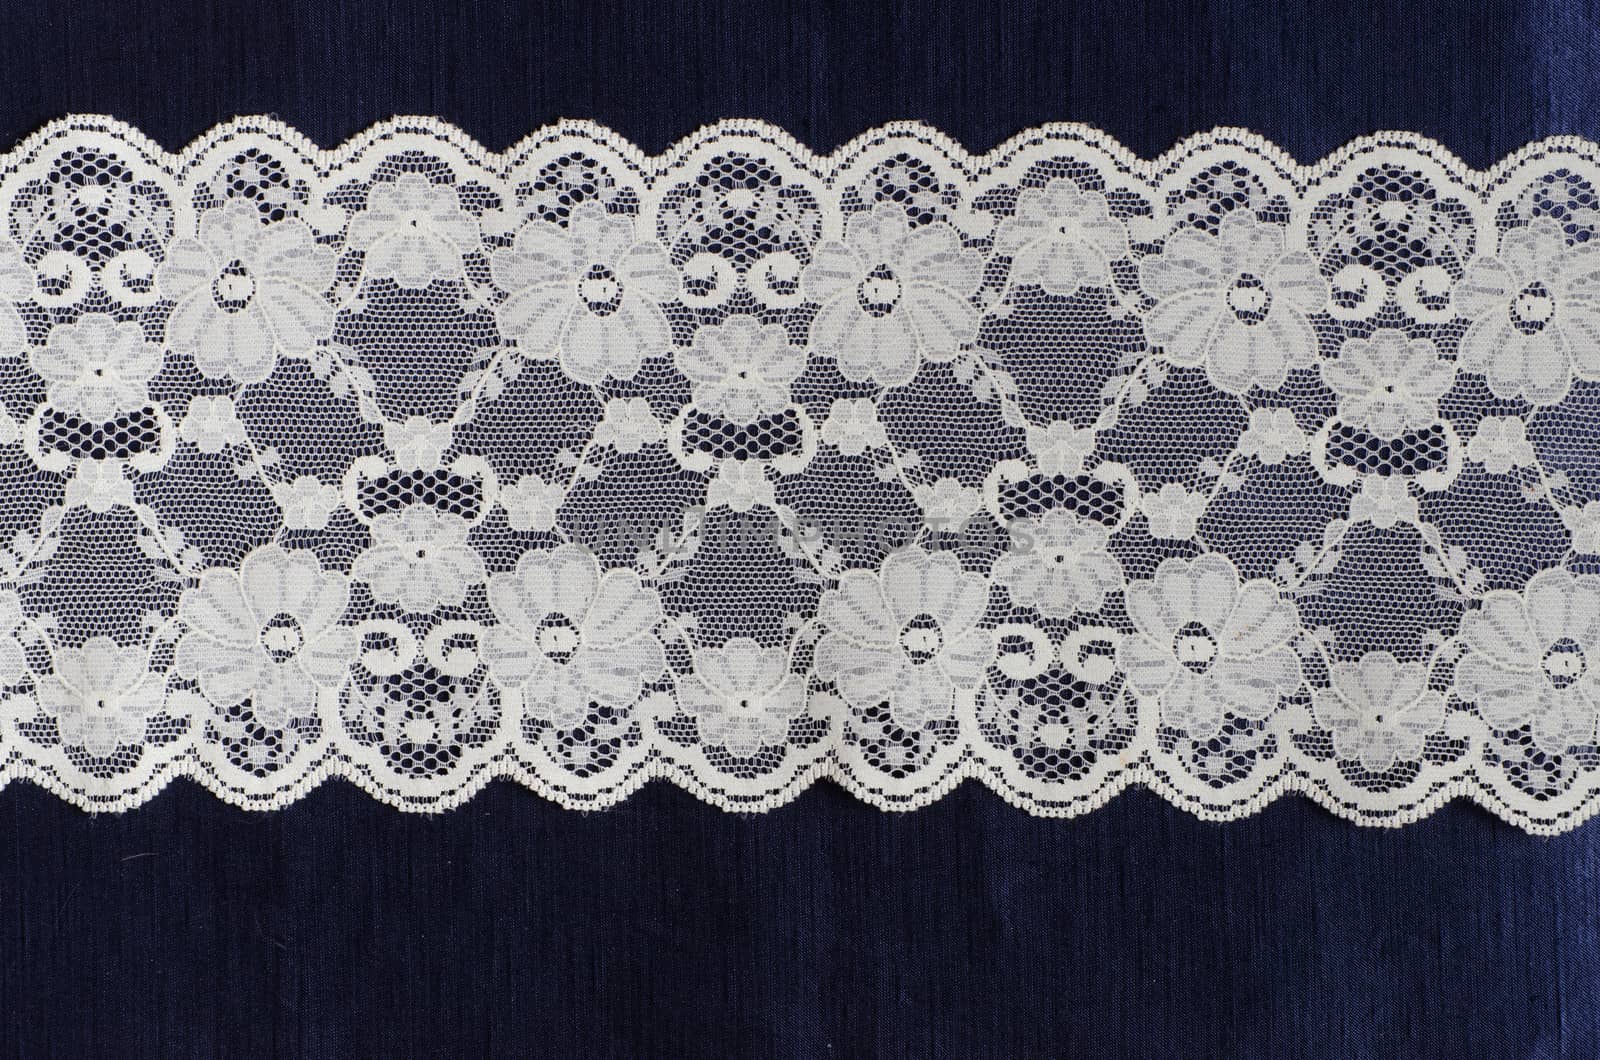 floral lace on the blue silk satin fabric by sarkao